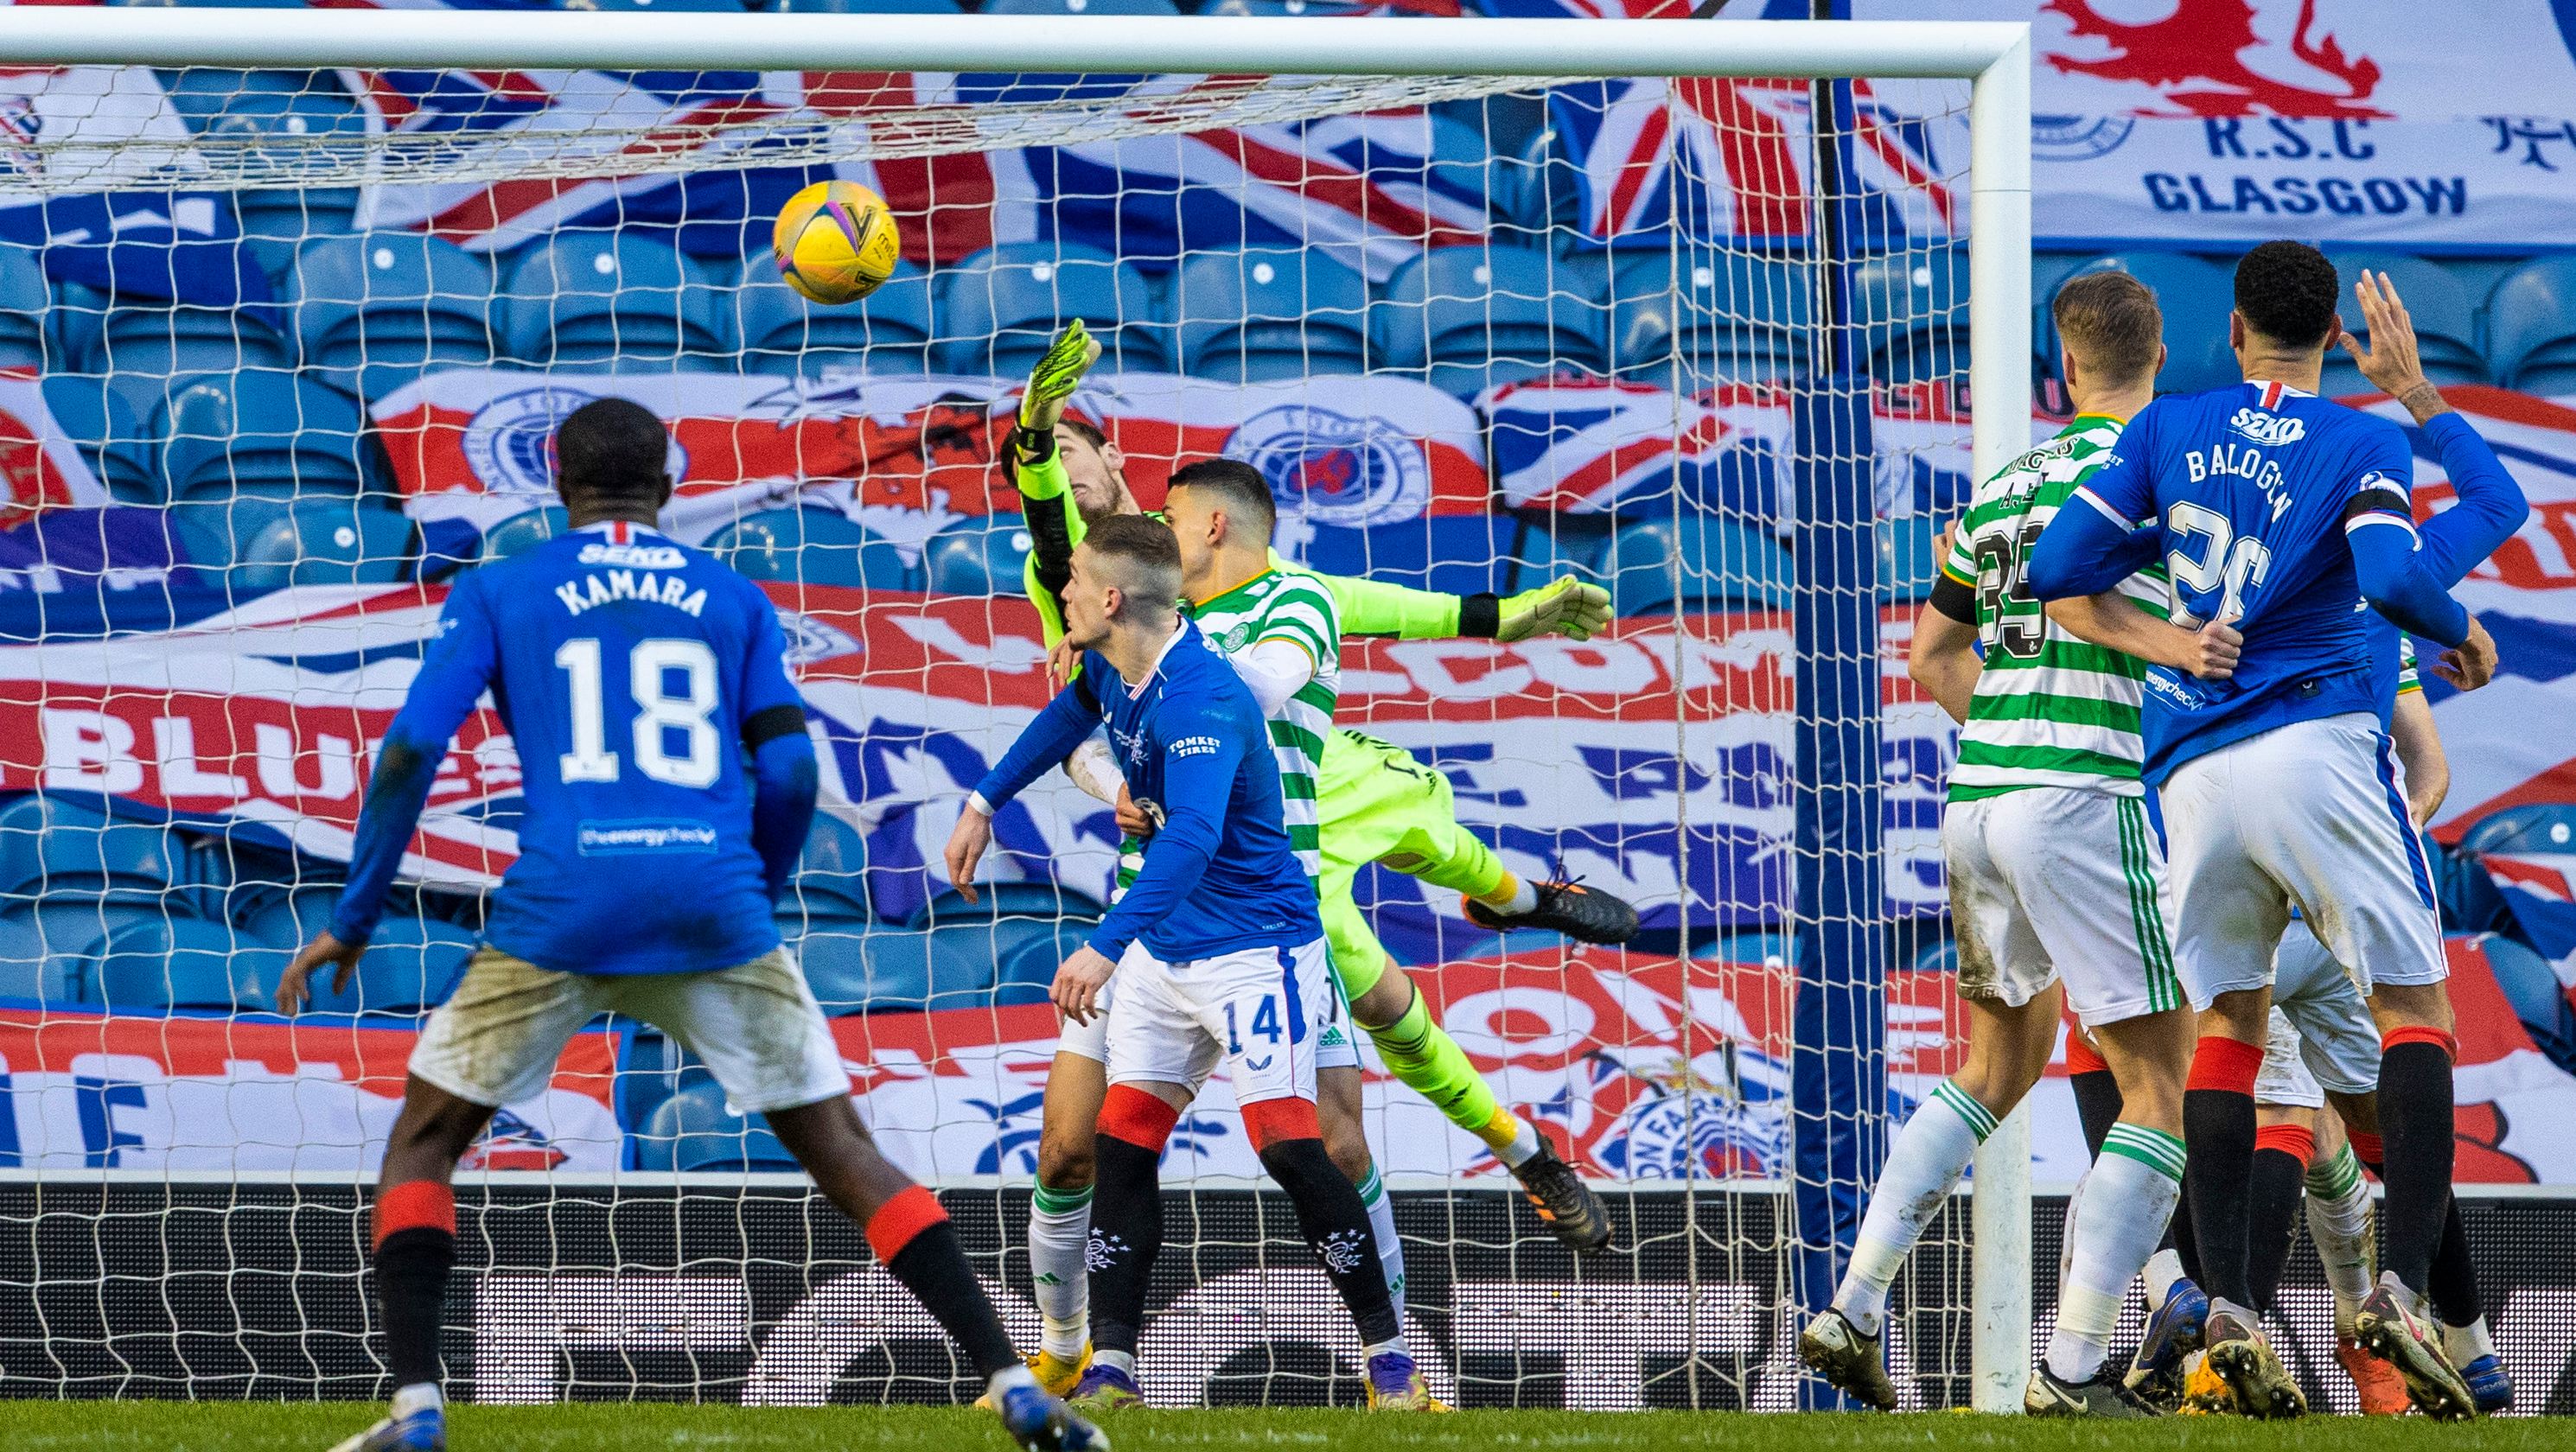 Celtic's title hopes suffered a crushing blow at Ibrox in January.